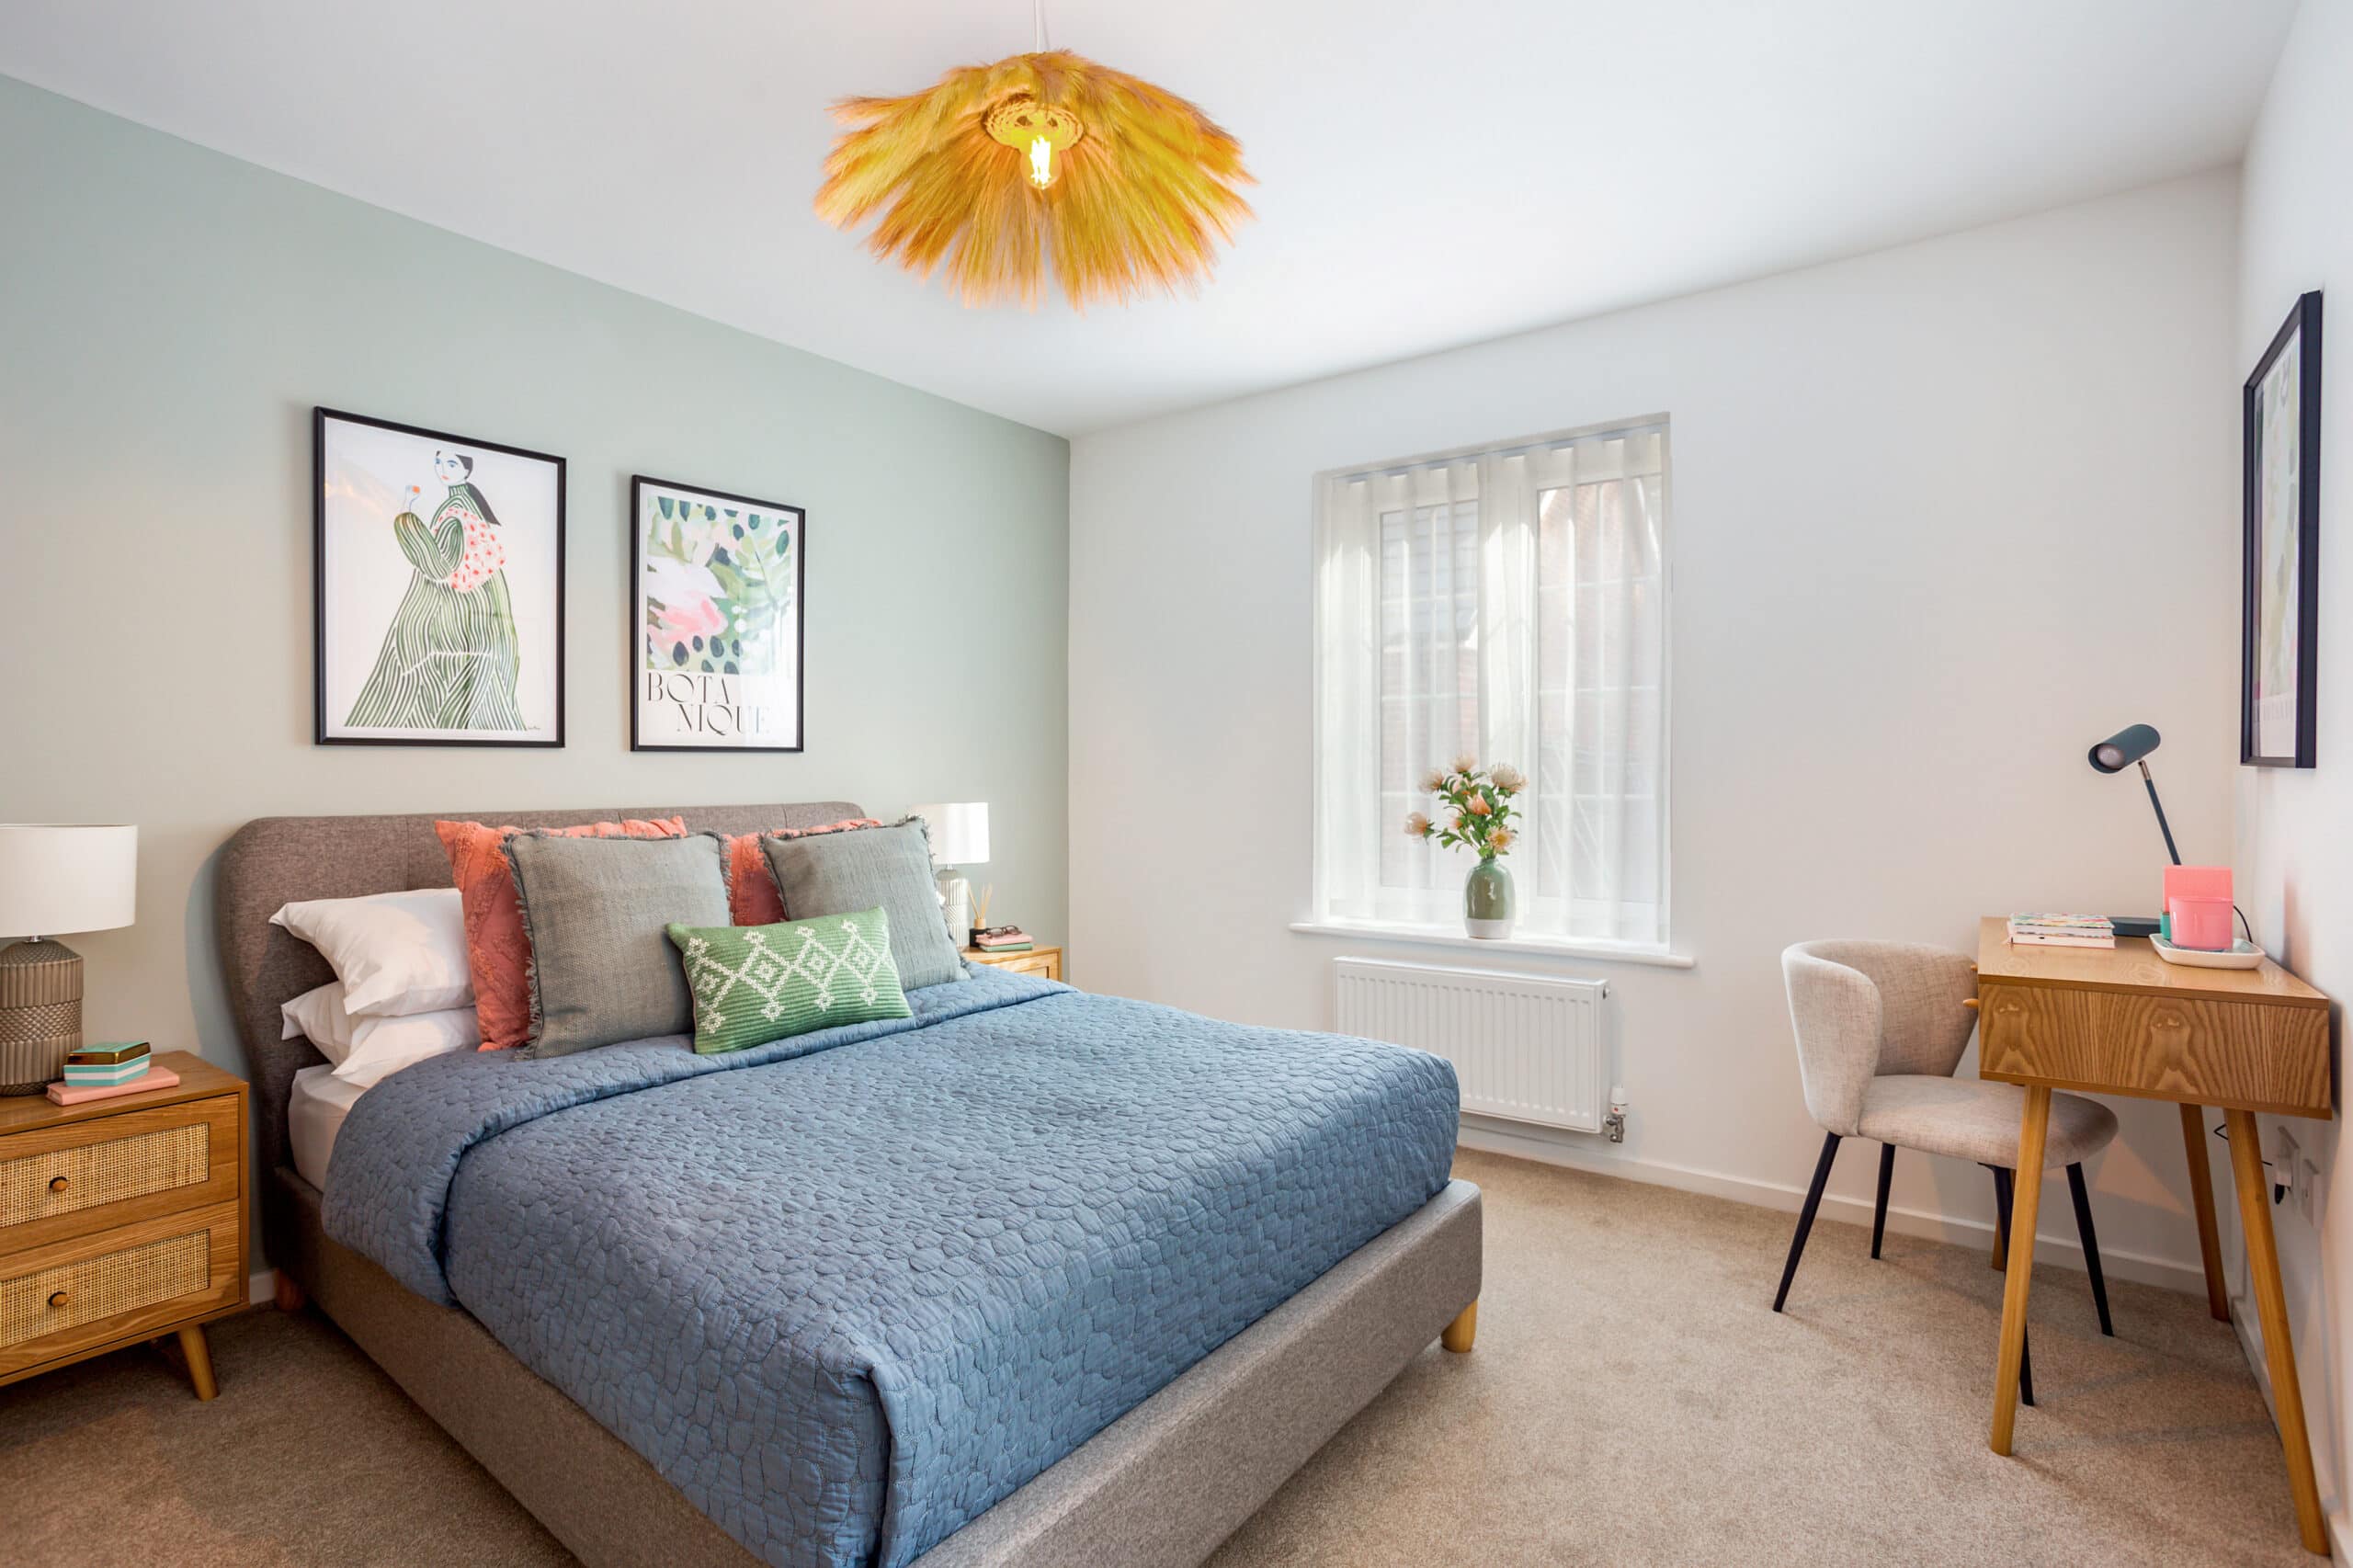 Image of a bedroom at The Old Mansion Collective by VIVID Homes - available to purchase through Shared ownership on Share to Buy!